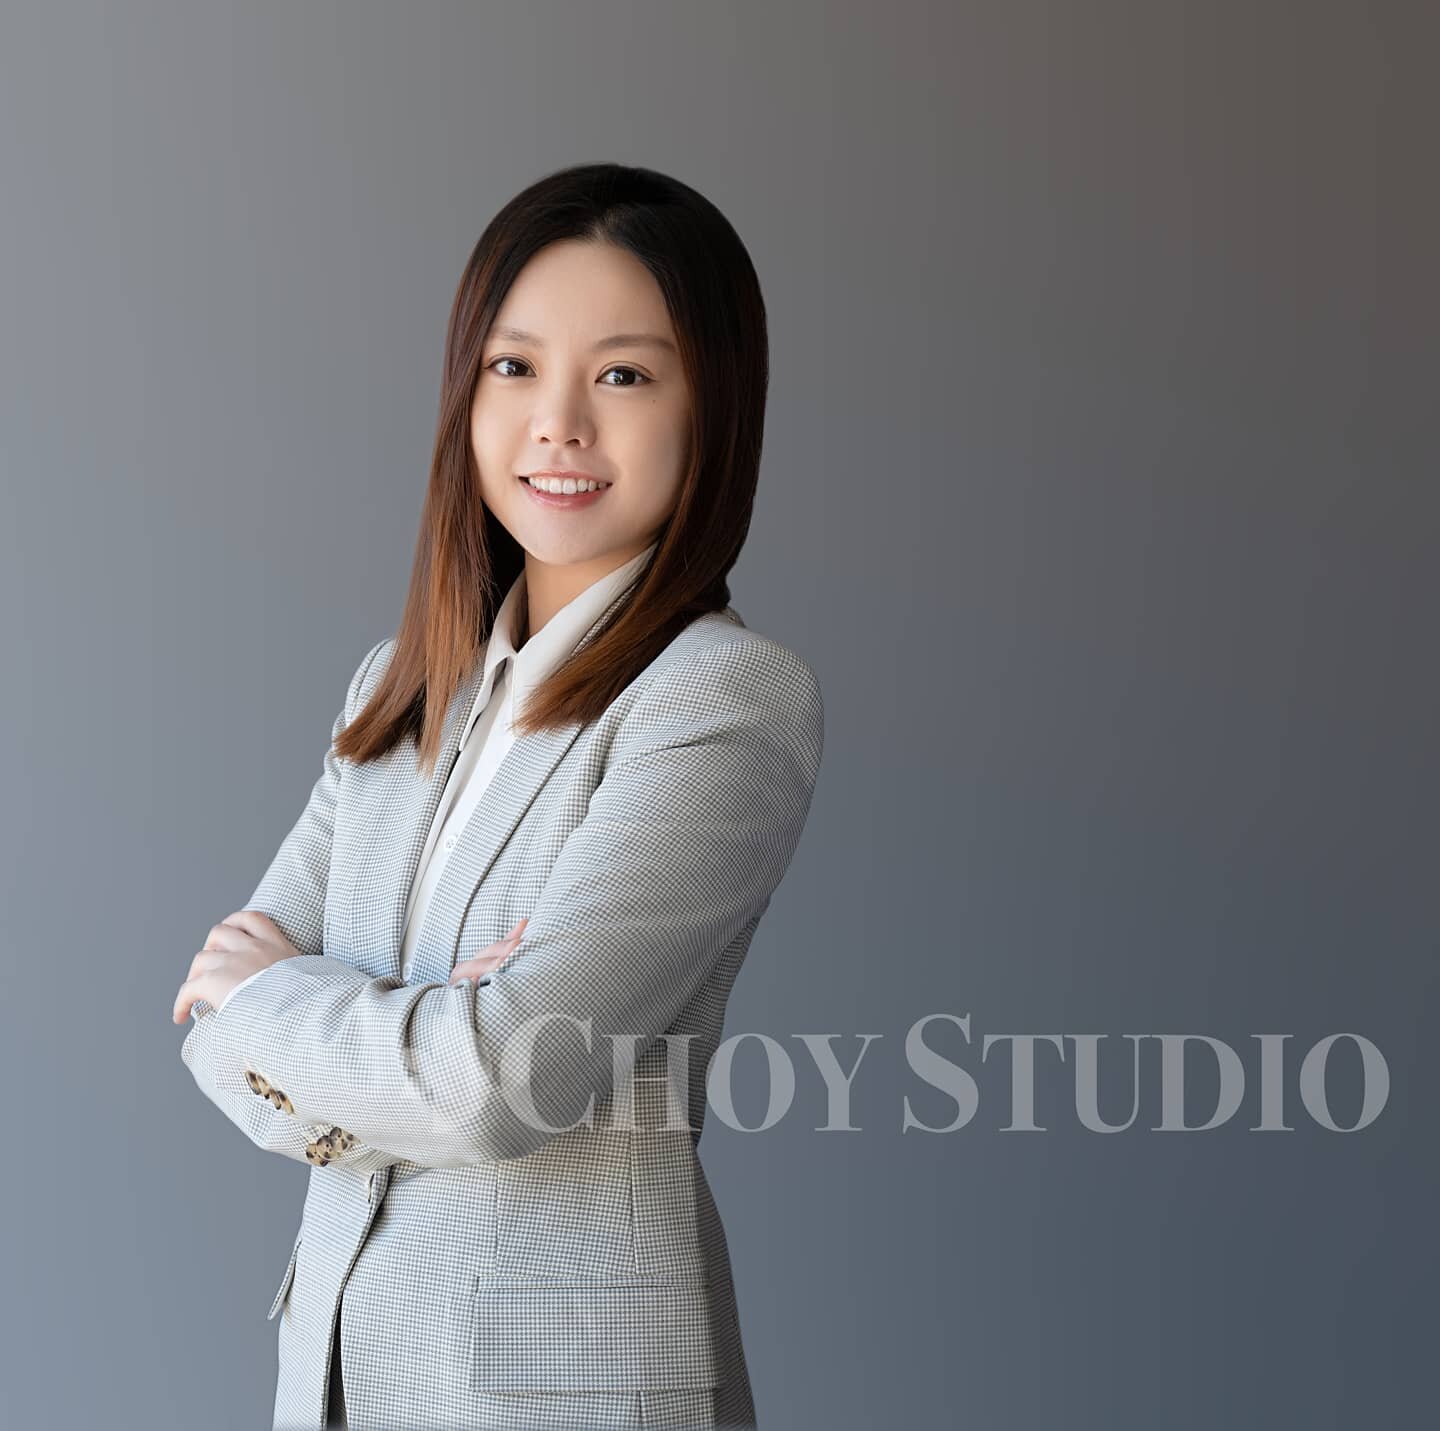 Give me a shout if you want a nice linkedin profile business photo
.
.
.
.
.
#businessportrait #businessportraits #businessphotography #businessphoto #businessphotographer #linkedin #linkedinphoto #linkedinphotography #businessportraittoronto #choyst